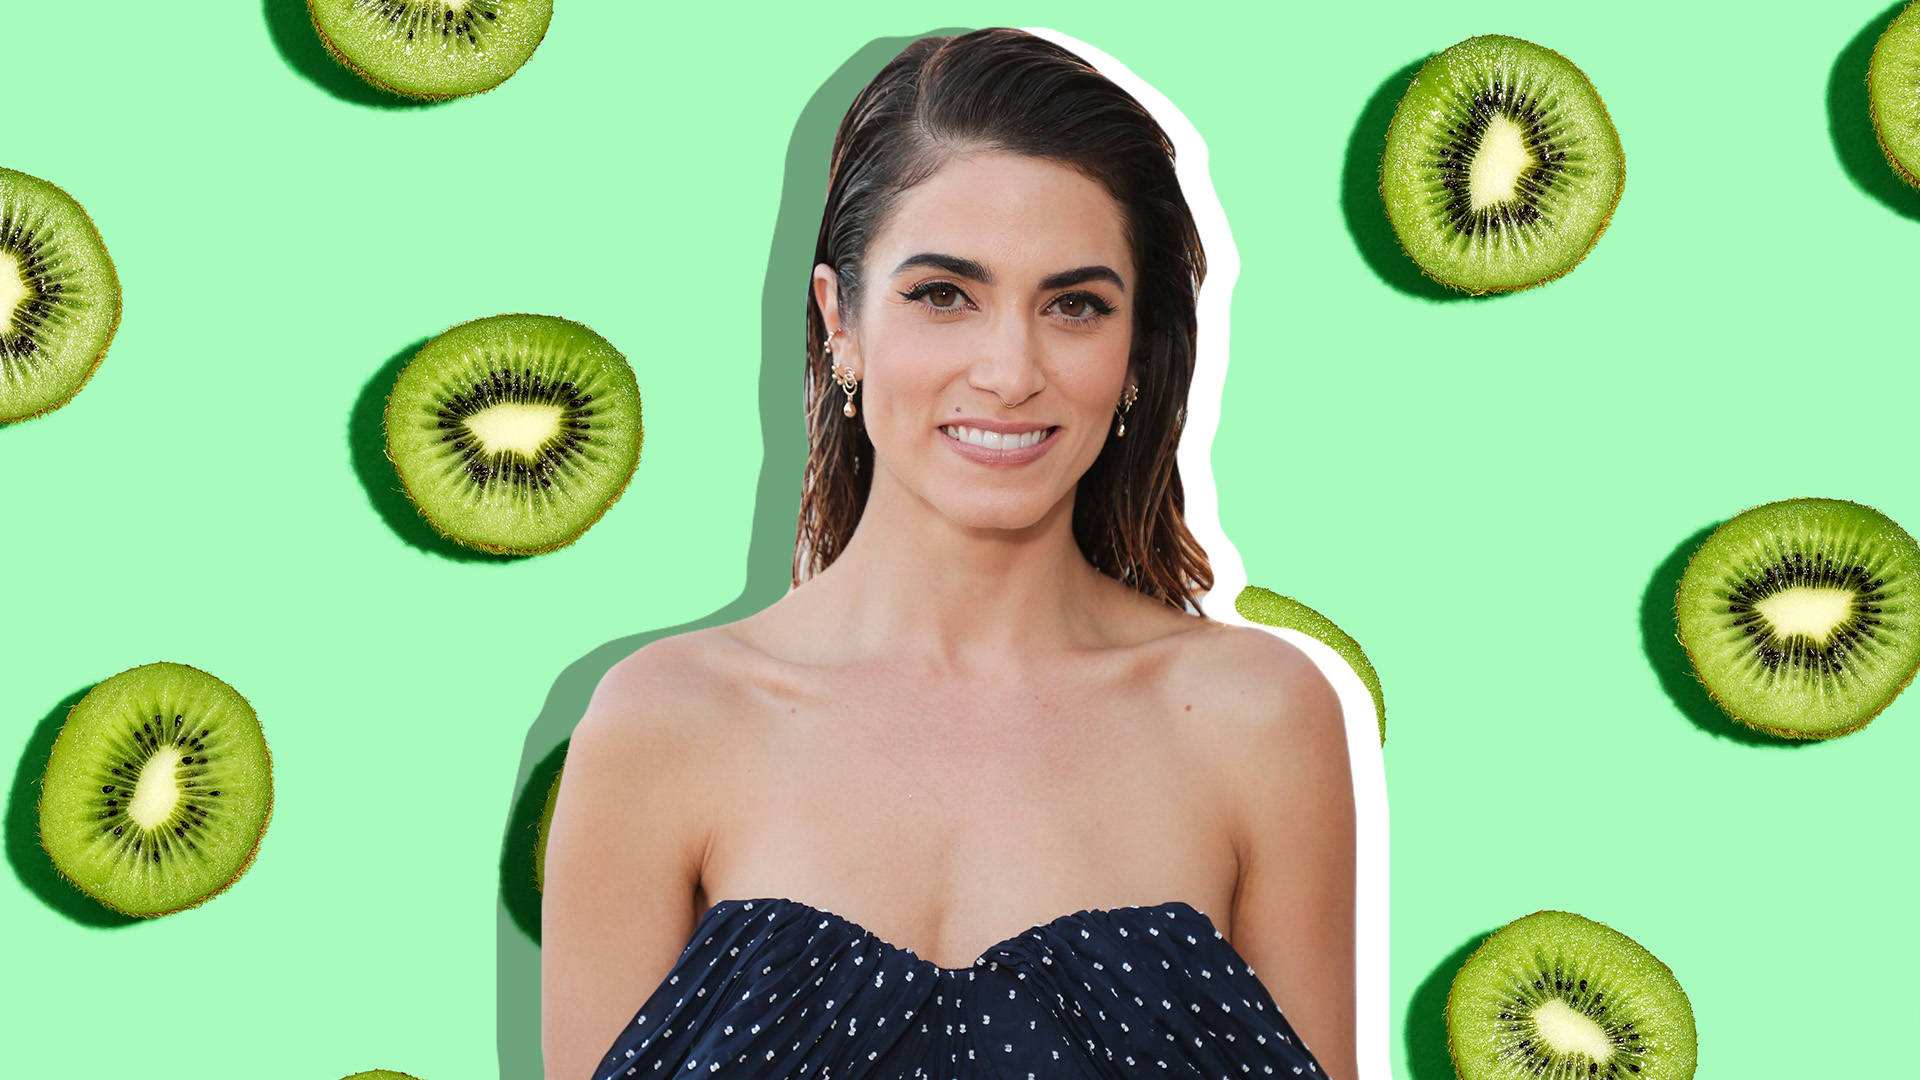 A Bewitching Poster Of A Female Star Nikki Reed Wearing A Black Dotted Dress And Smiling With A Green Kiwi Fruit Backdrop